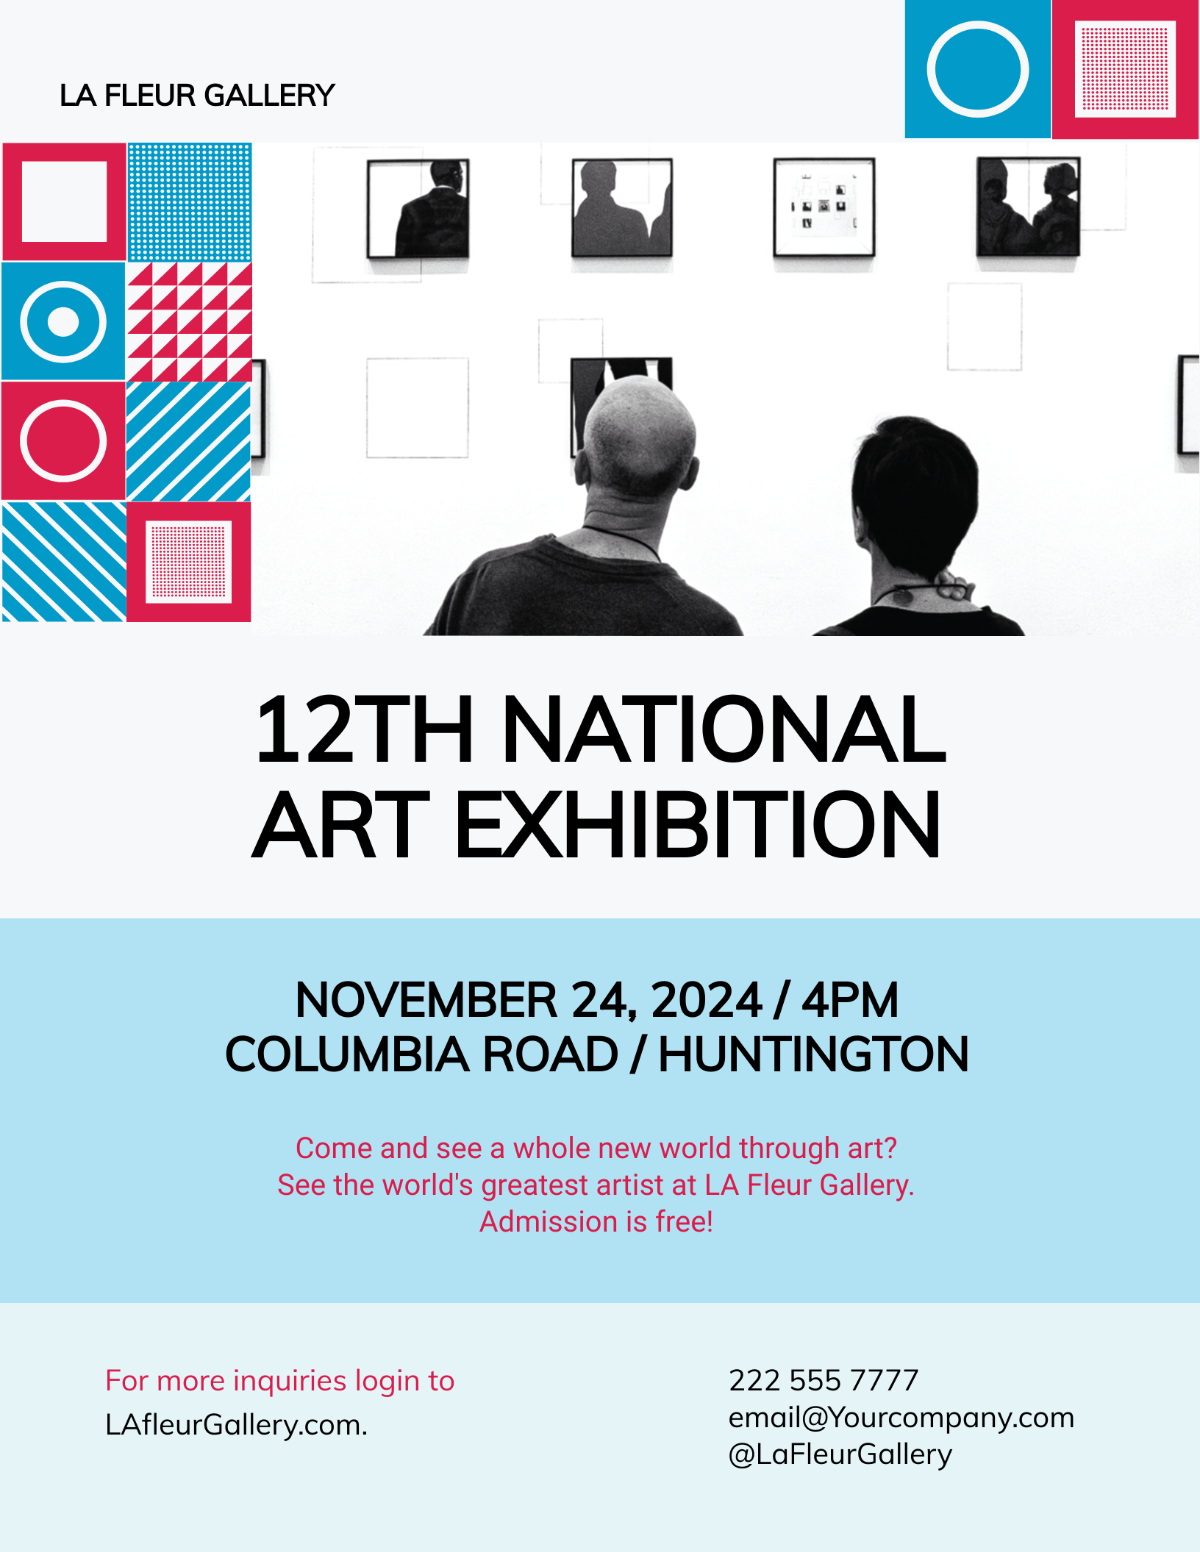 Free Art Show Exhibition Flyer Template